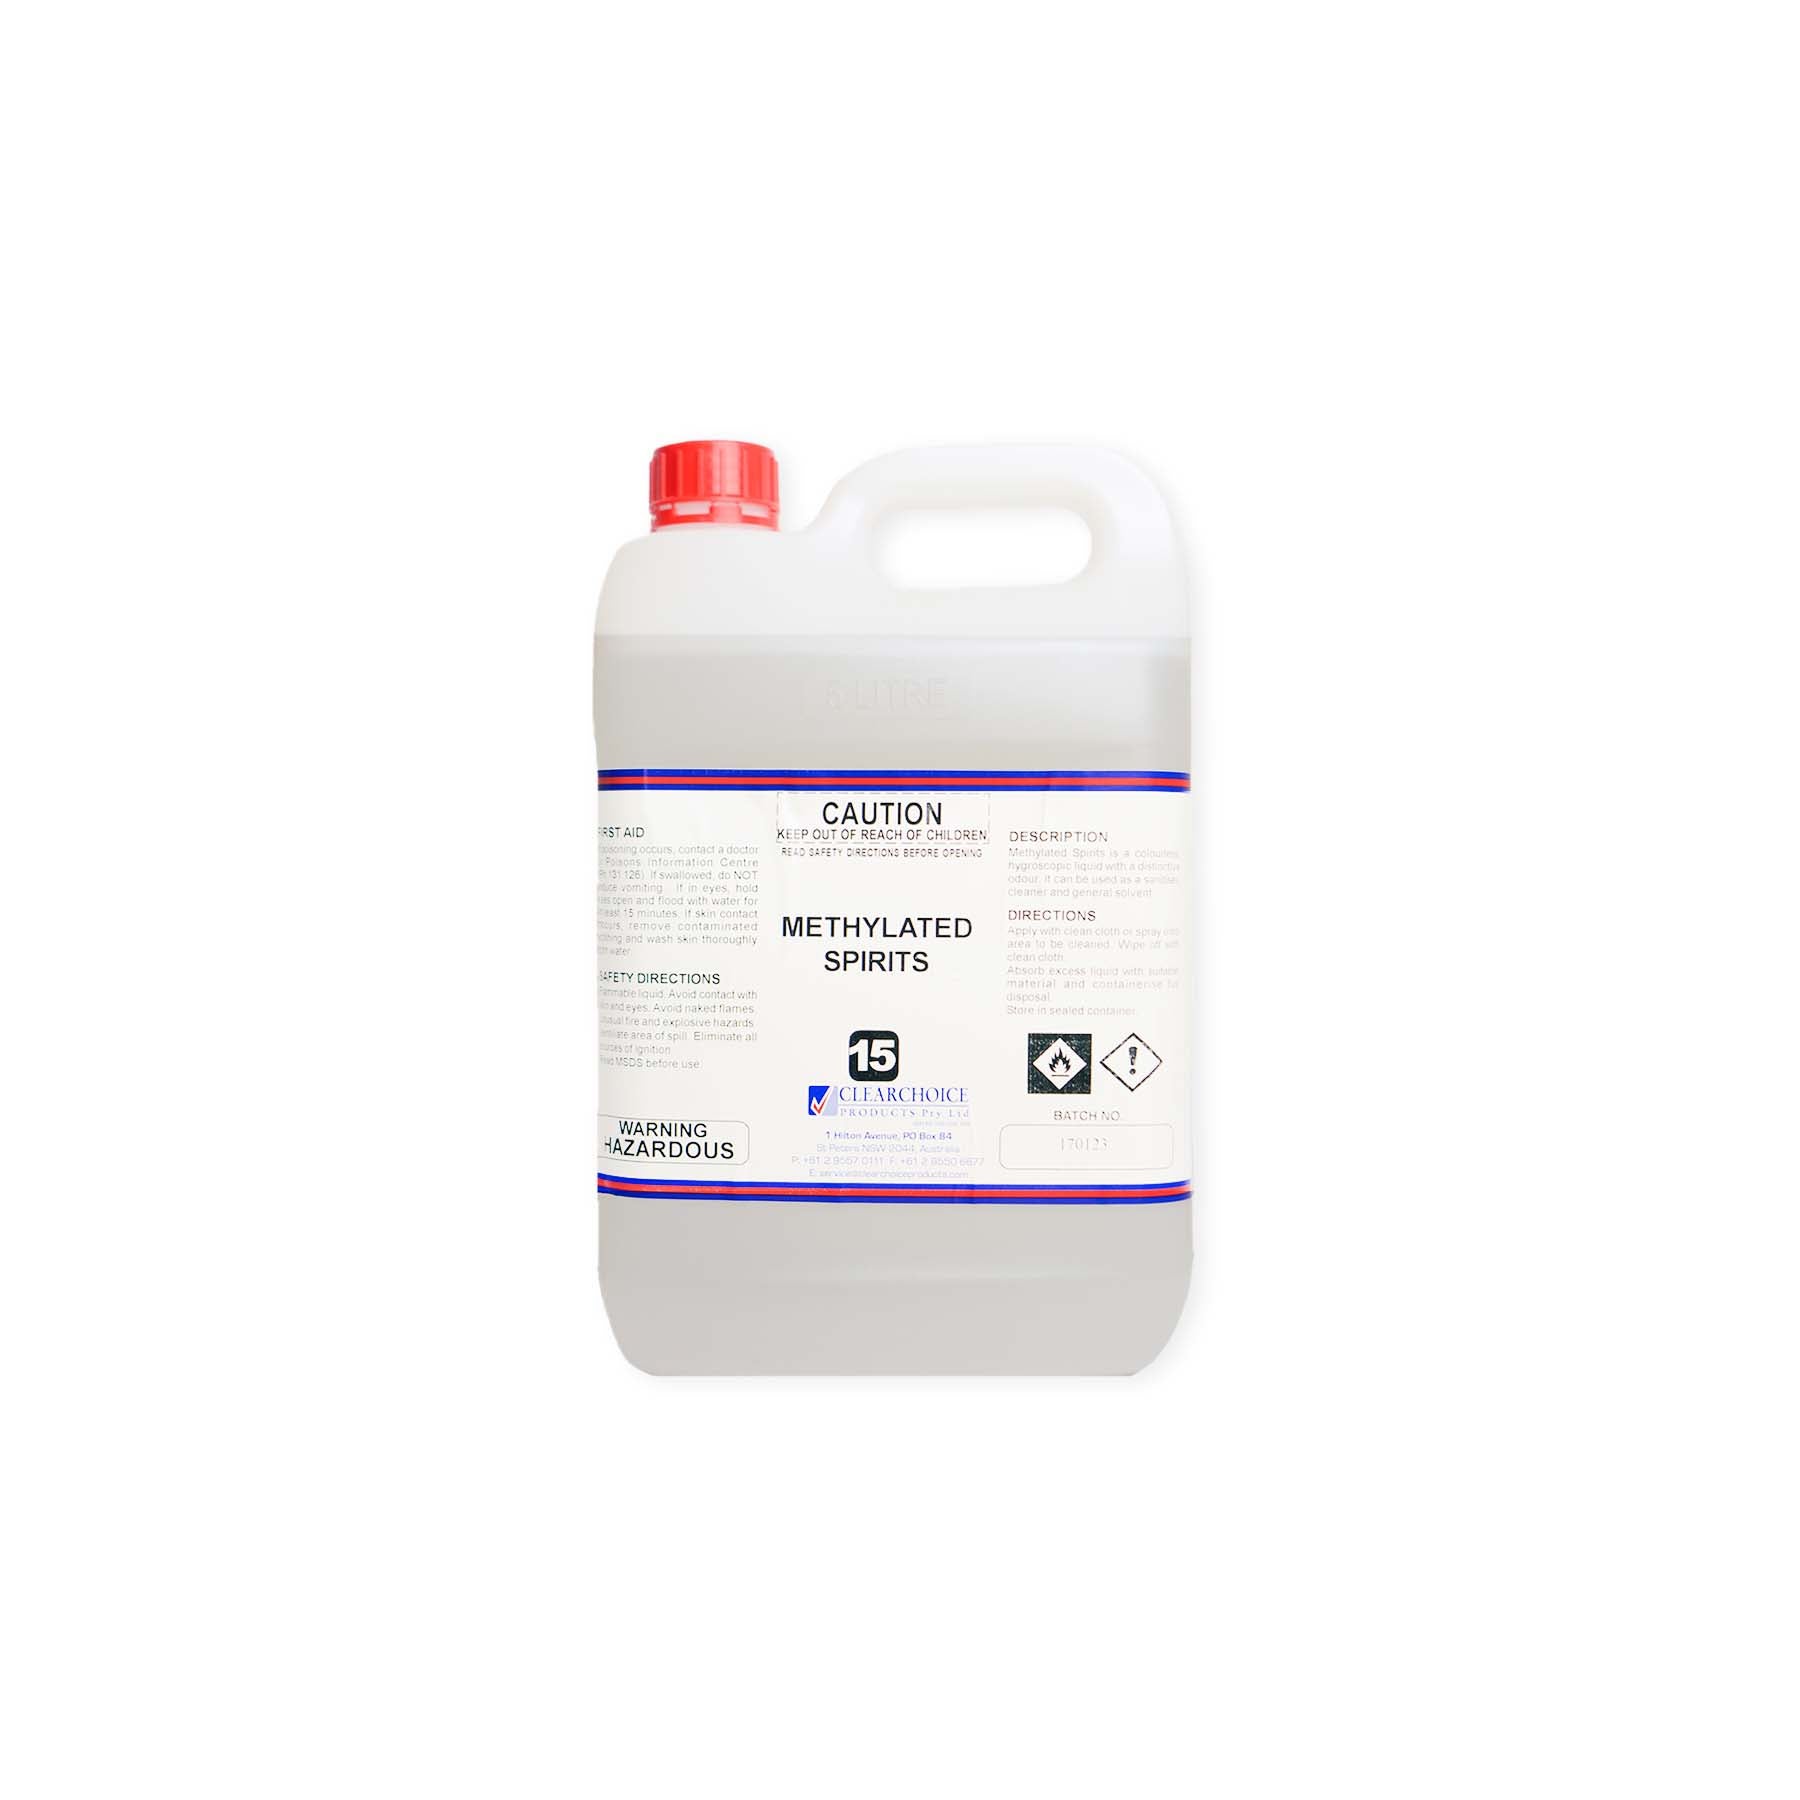 CLEARCHOICE METHYLATED SPIRITS 5L